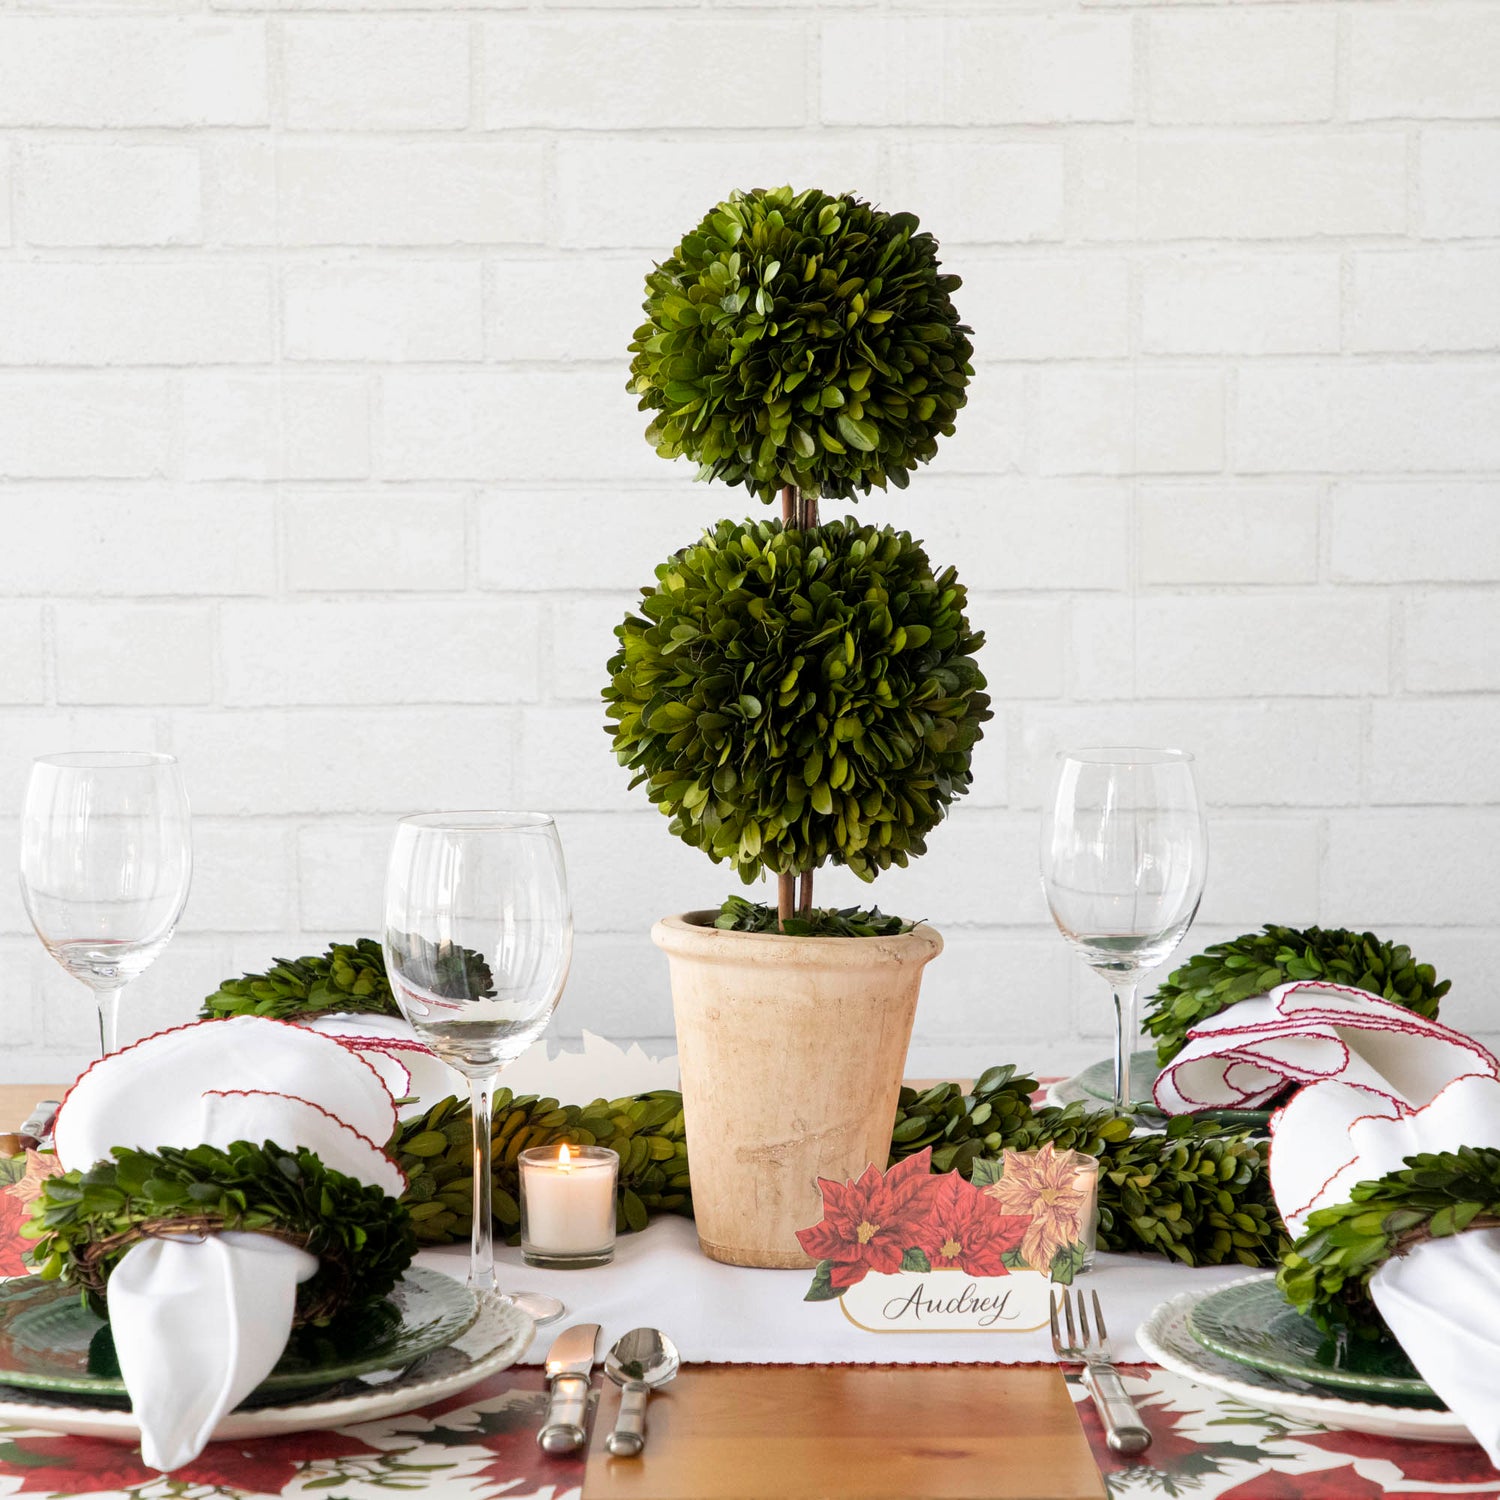 A Christmas table setting with a Mills Floral Company Preserved Boxwood Double Ball Topiary in a pot.